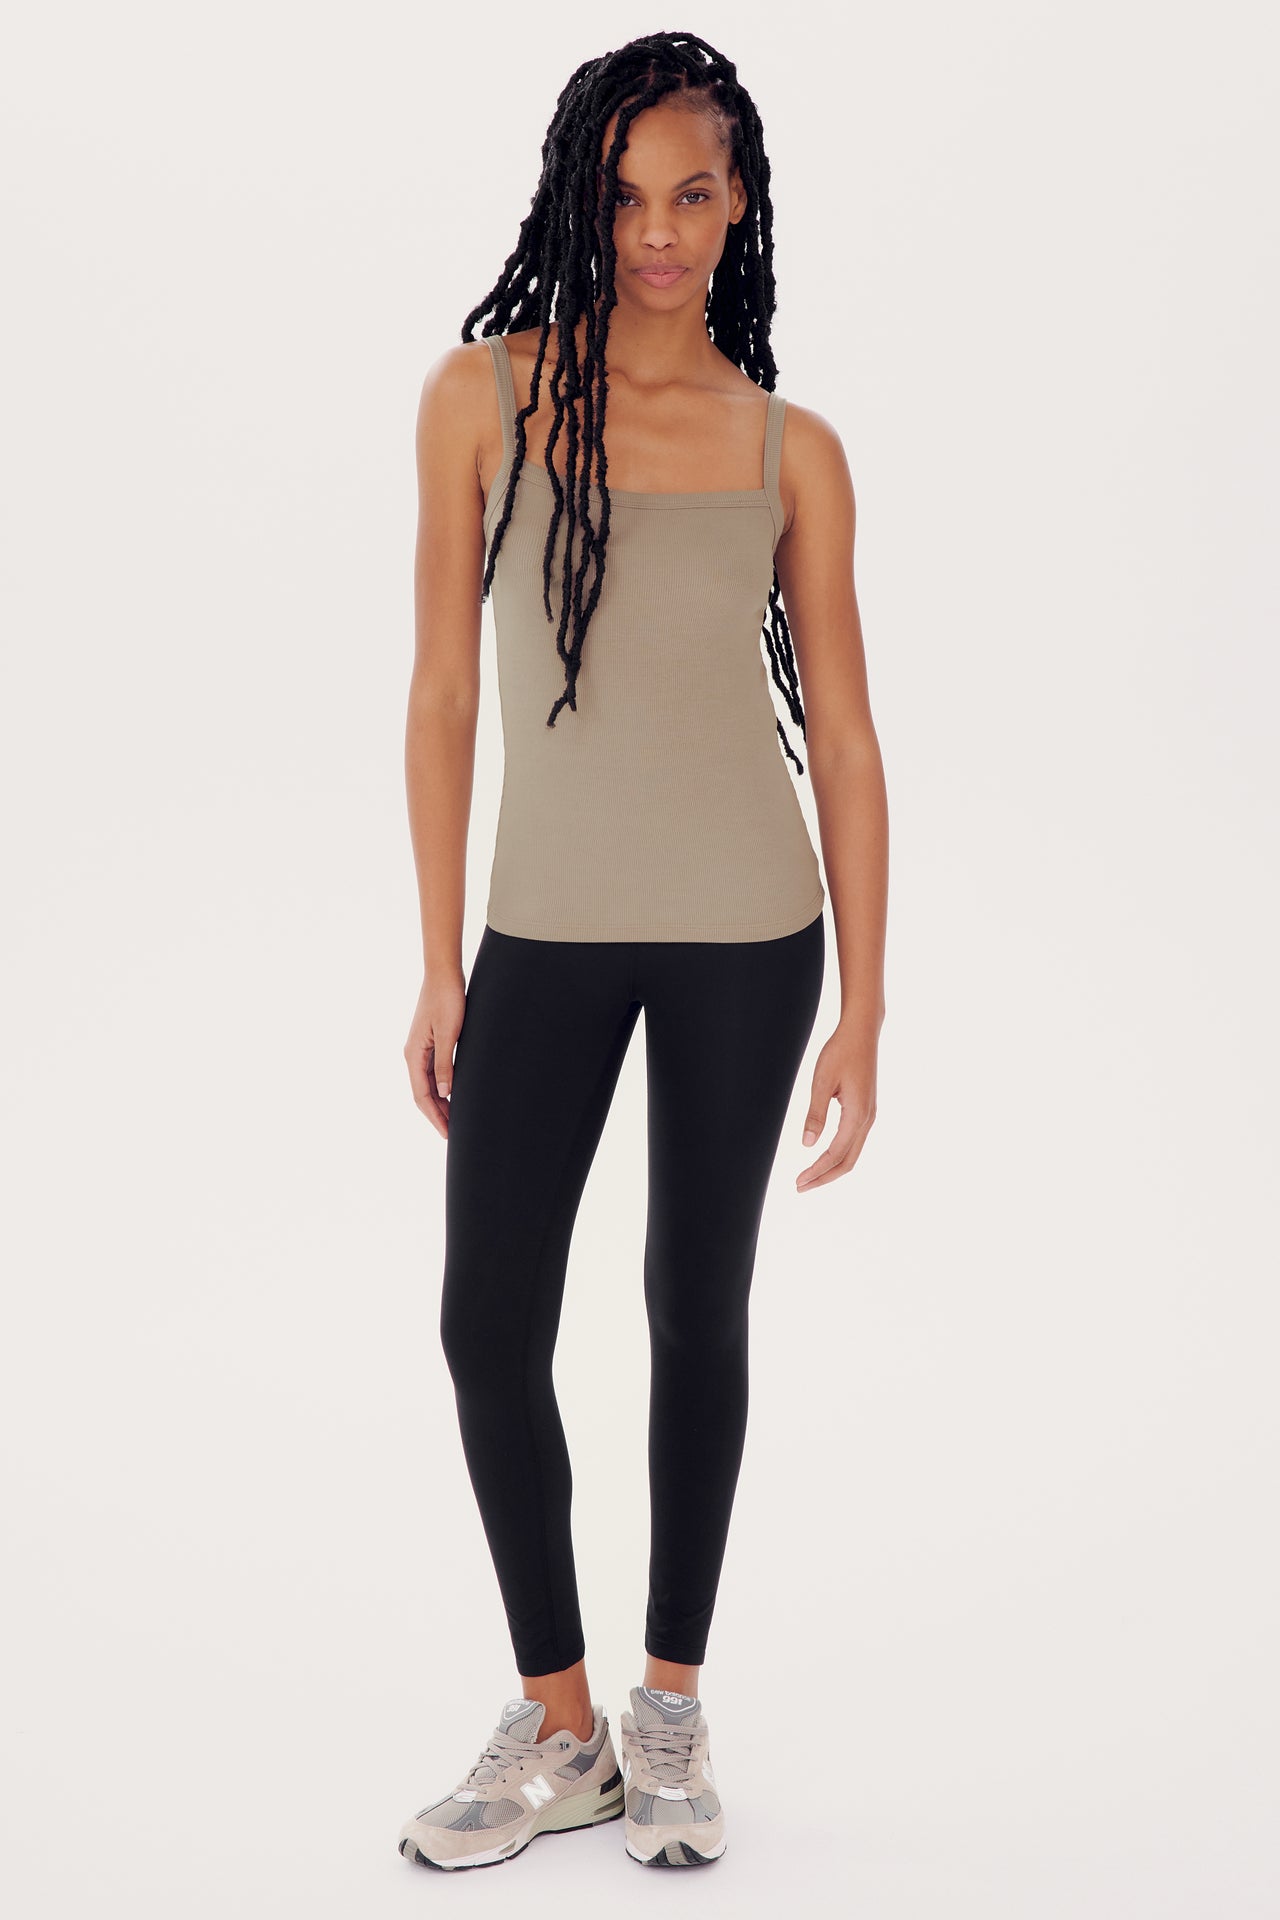 A woman wearing a Romy Rib Tank in Latte by SPLITS59 with a square neckline and black leggings stands confidently against a white background.